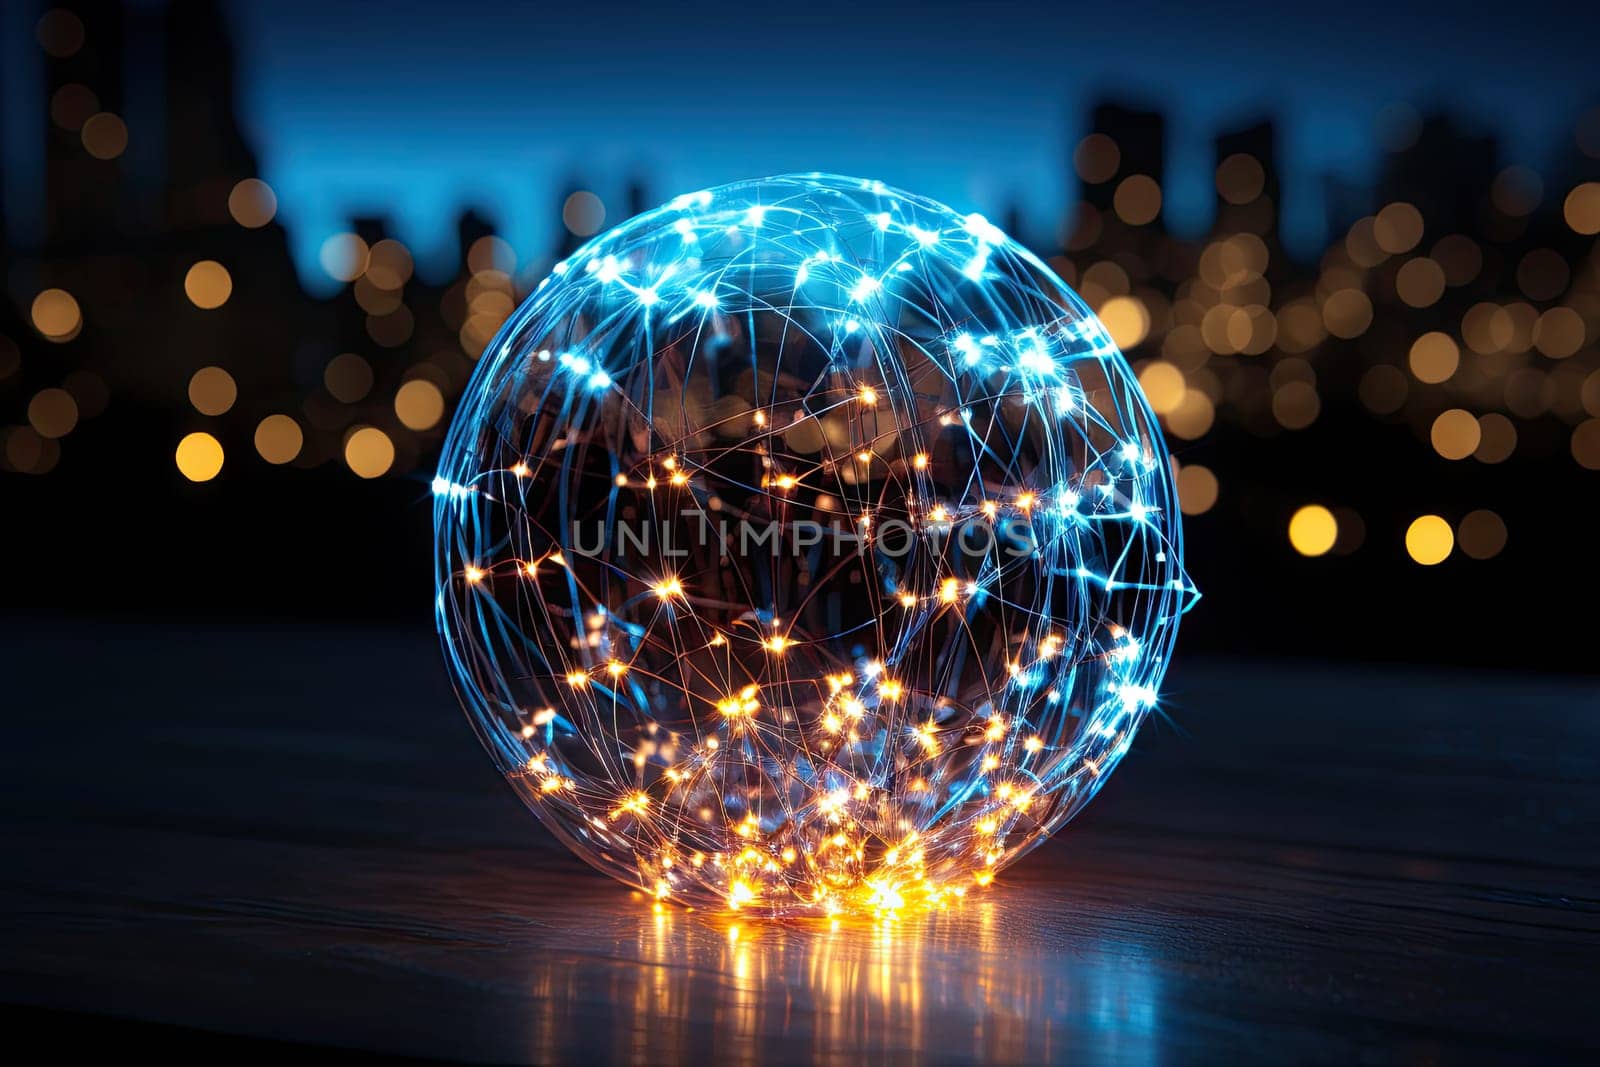 A Shimmering Sphere Illuminating a Wooden Surface with Brilliant, Radiant, and Enchanting Lights